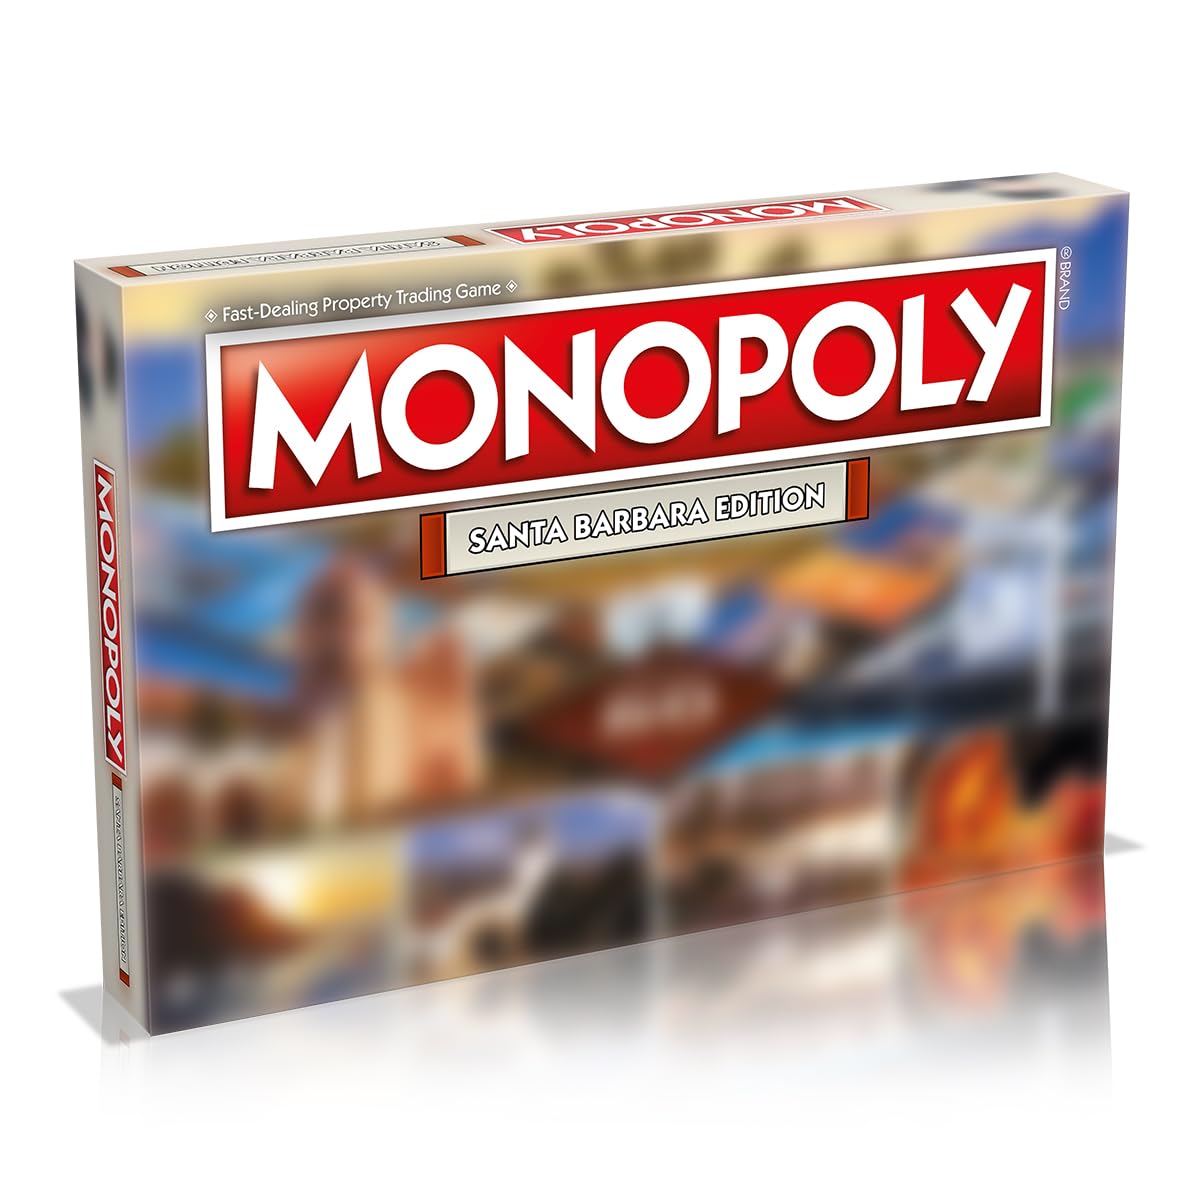 Santa Barbara Monopoly Family Board Game, for 2 to 6 Players, Adults and Kids Ages 8 and up, Buy, Sell and Trade Your Way to Success